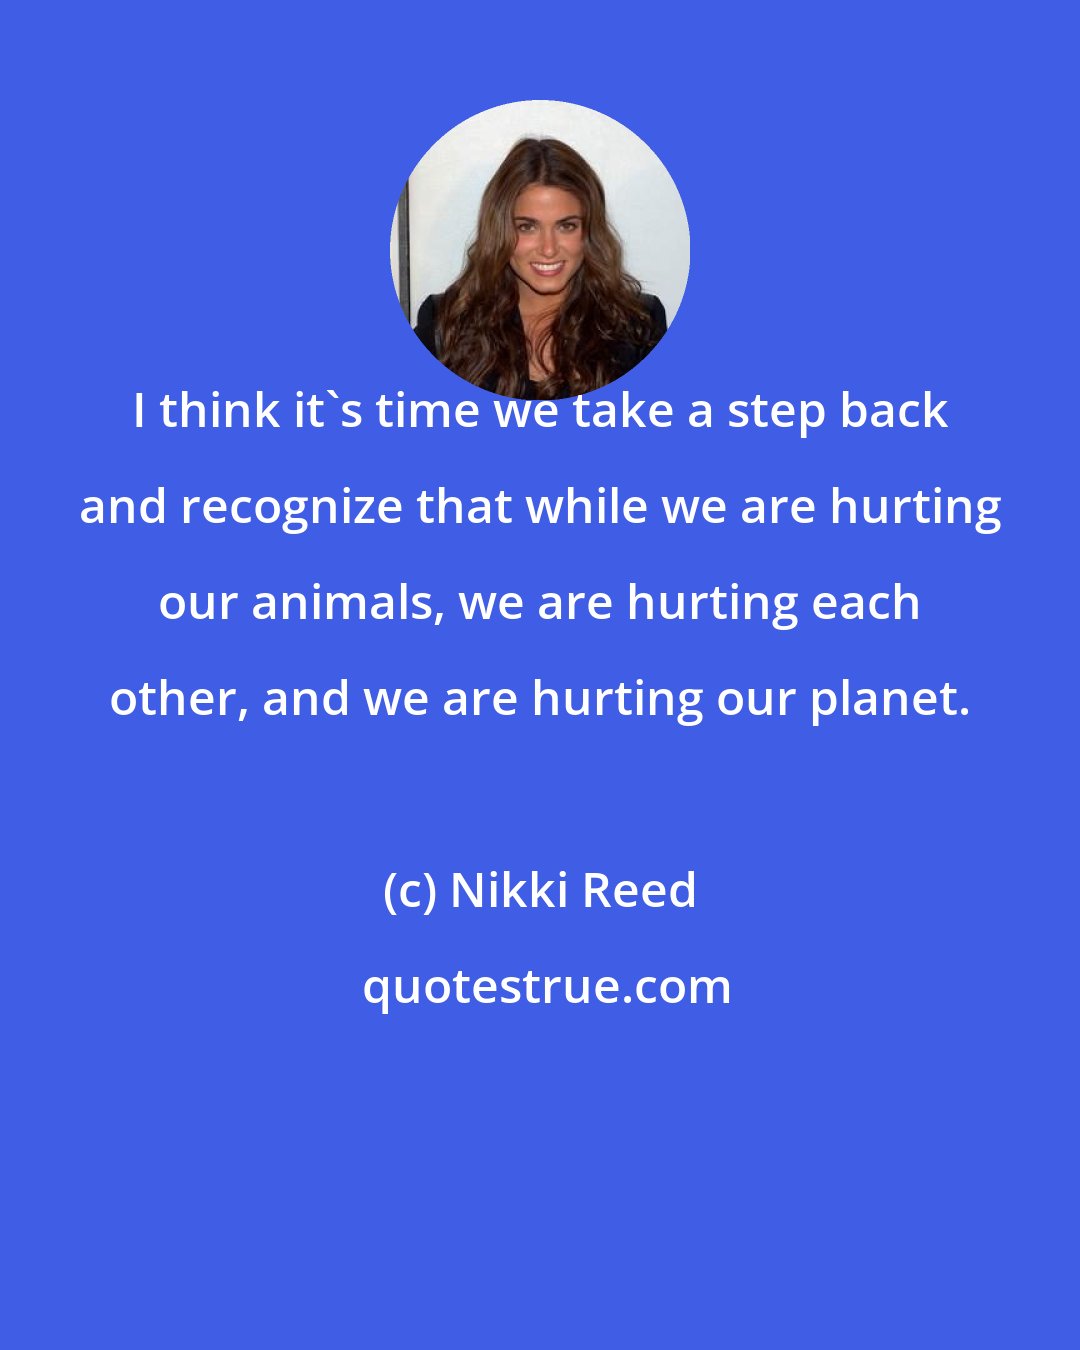 Nikki Reed: I think it's time we take a step back and recognize that while we are hurting our animals, we are hurting each other, and we are hurting our planet.